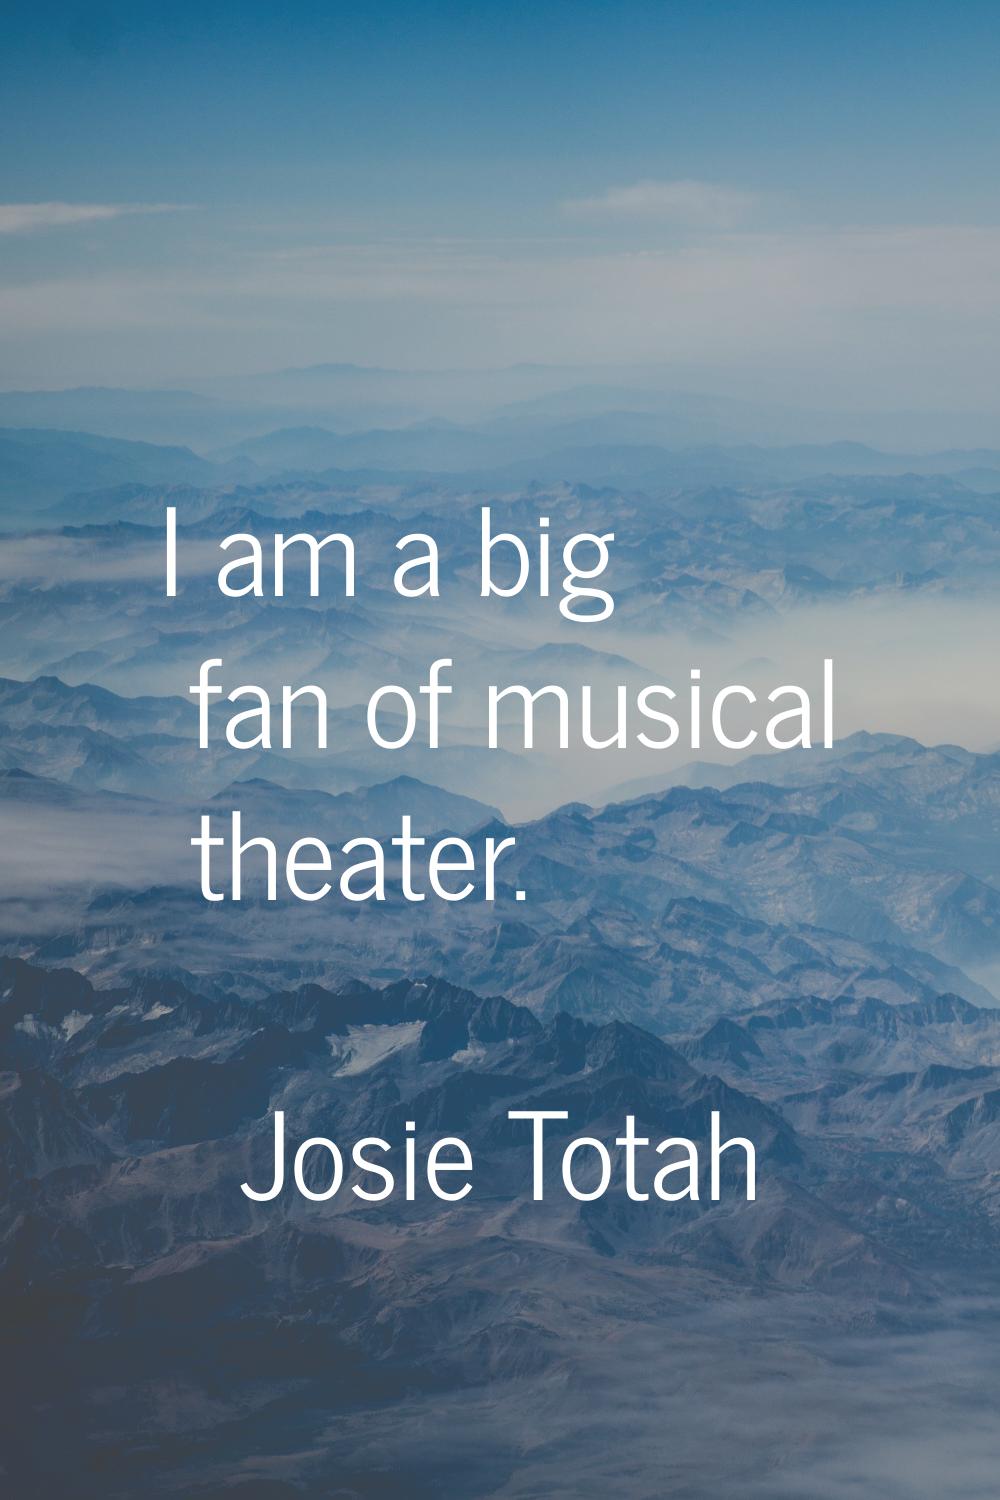 I am a big fan of musical theater.